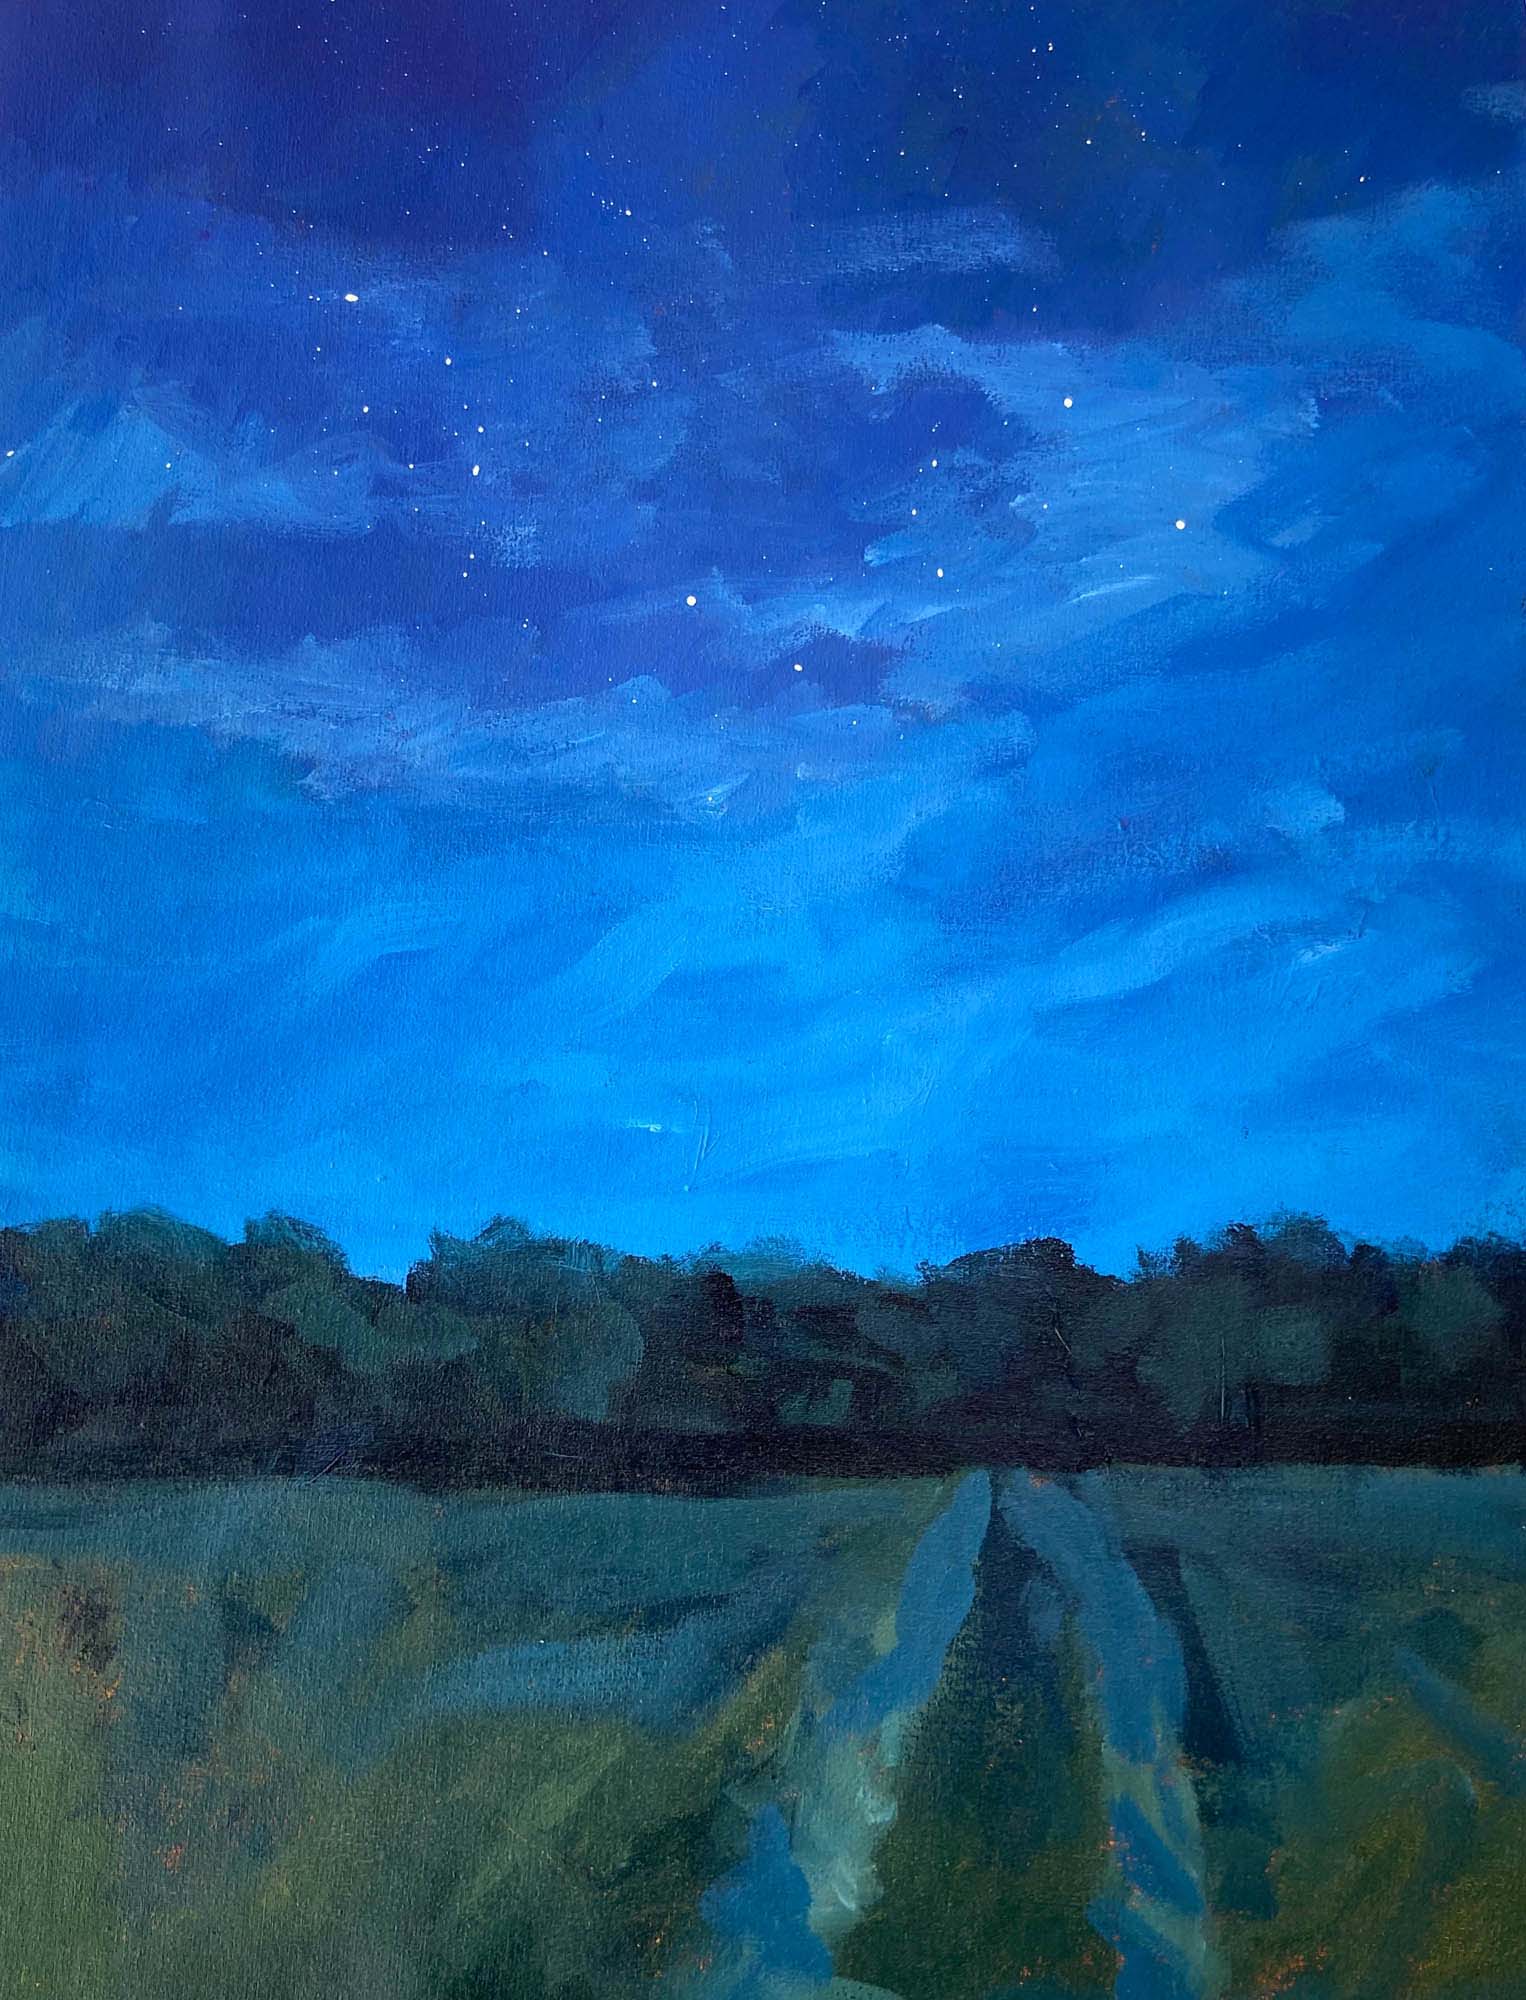 Expressive brushstrokes to indicate evening sky with clouds and stars, landscape with trees and path